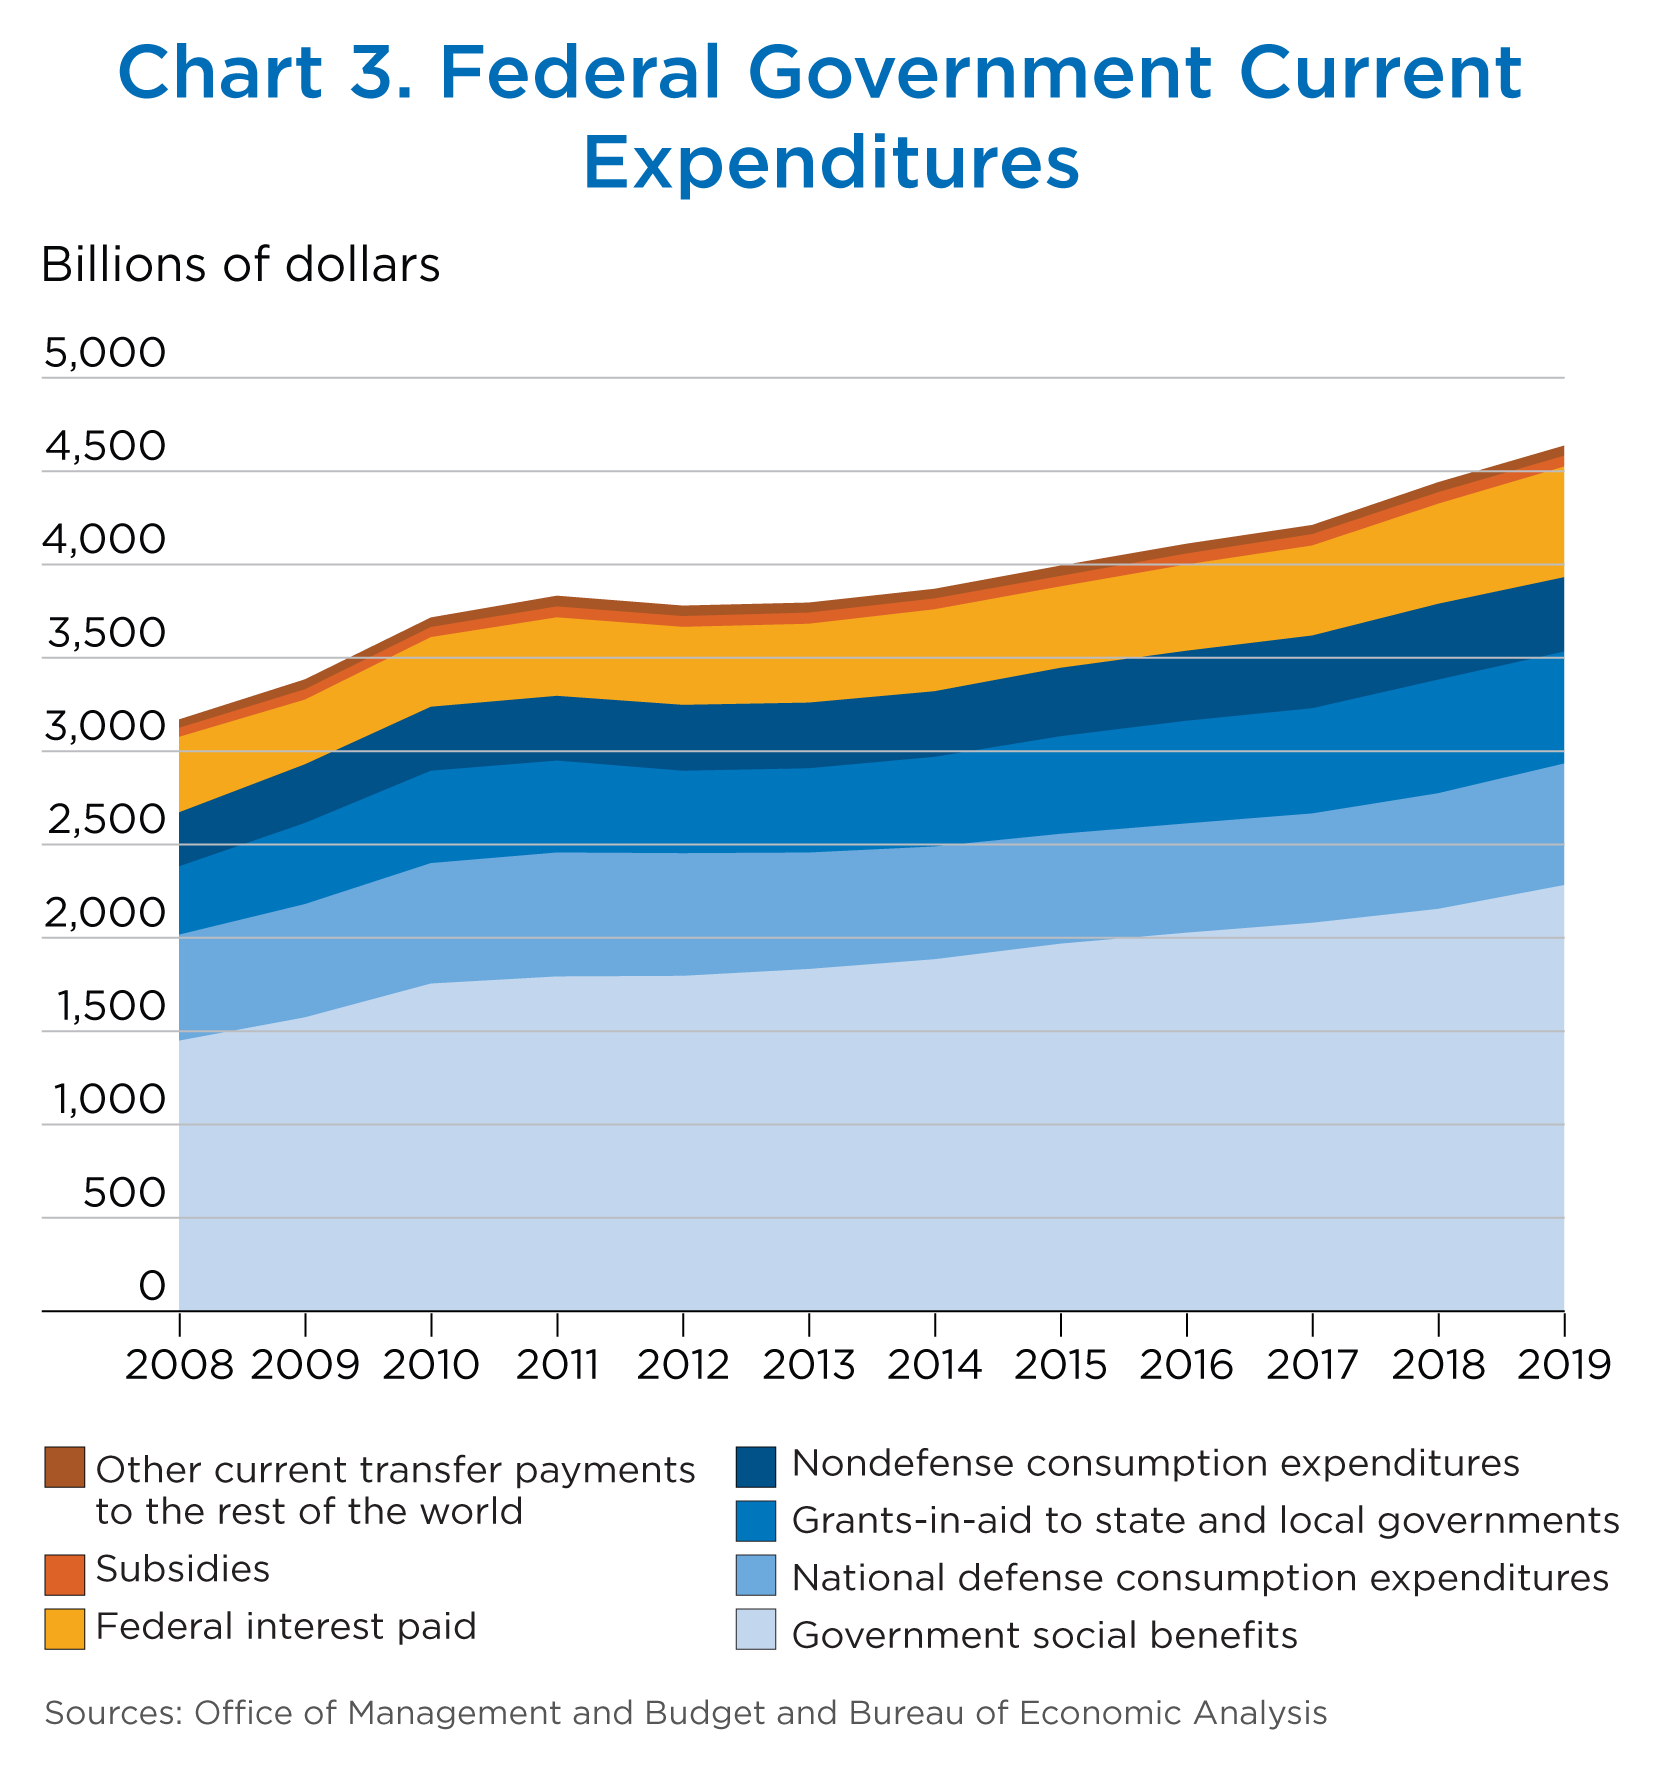 Chart 3. Federal Government Current Expenditures, Bar Chart